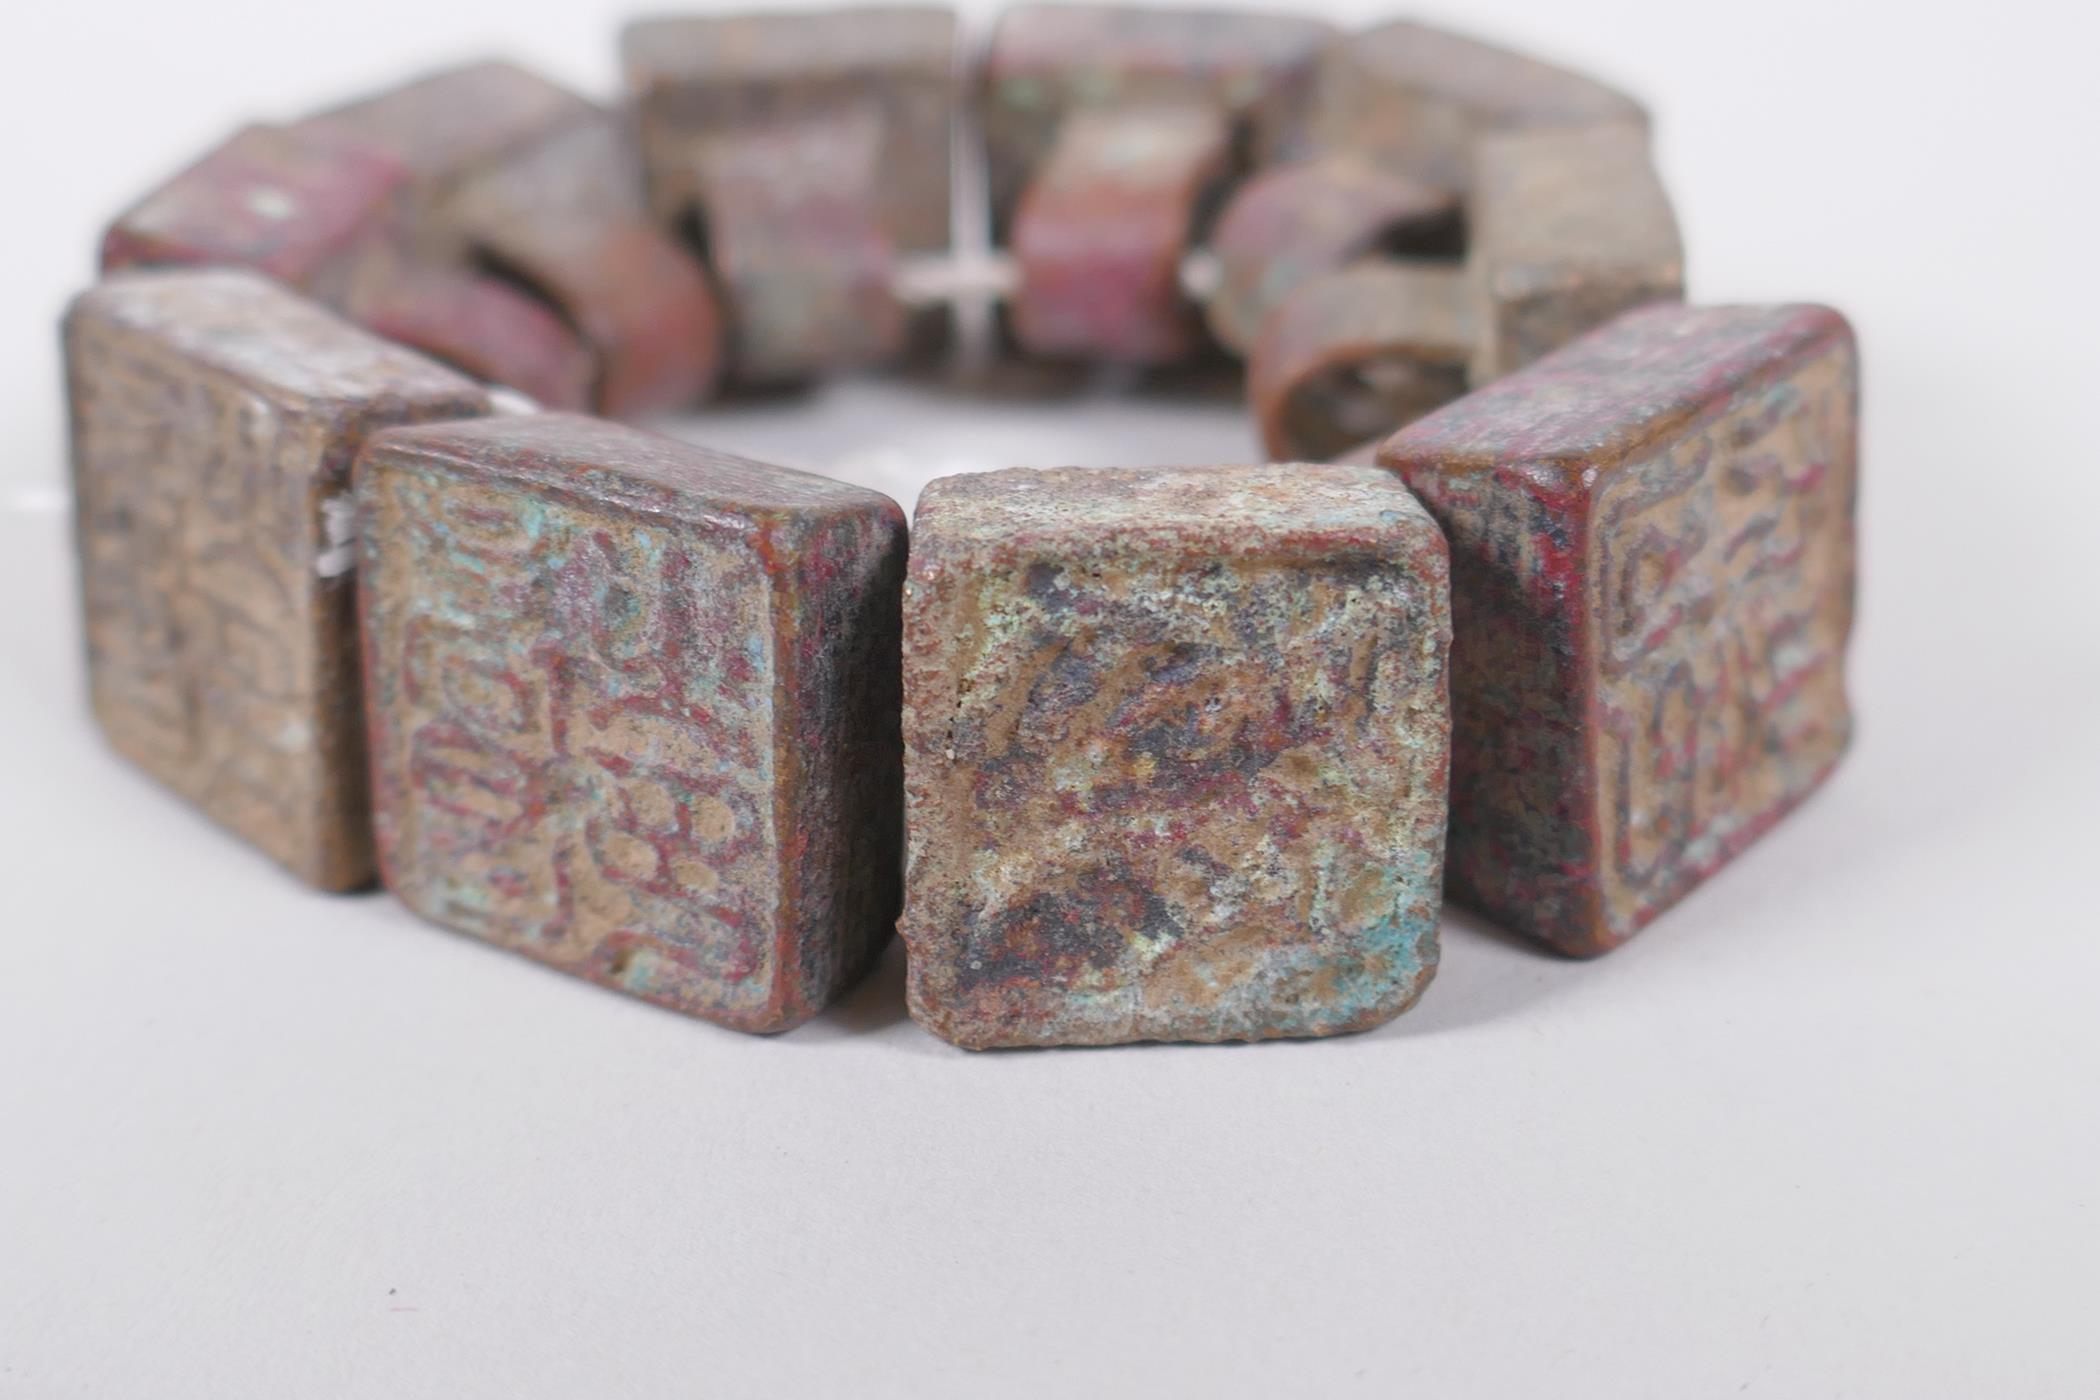 Ten archaic style Chinese bronze seals, 2 x 2cm - Image 2 of 5